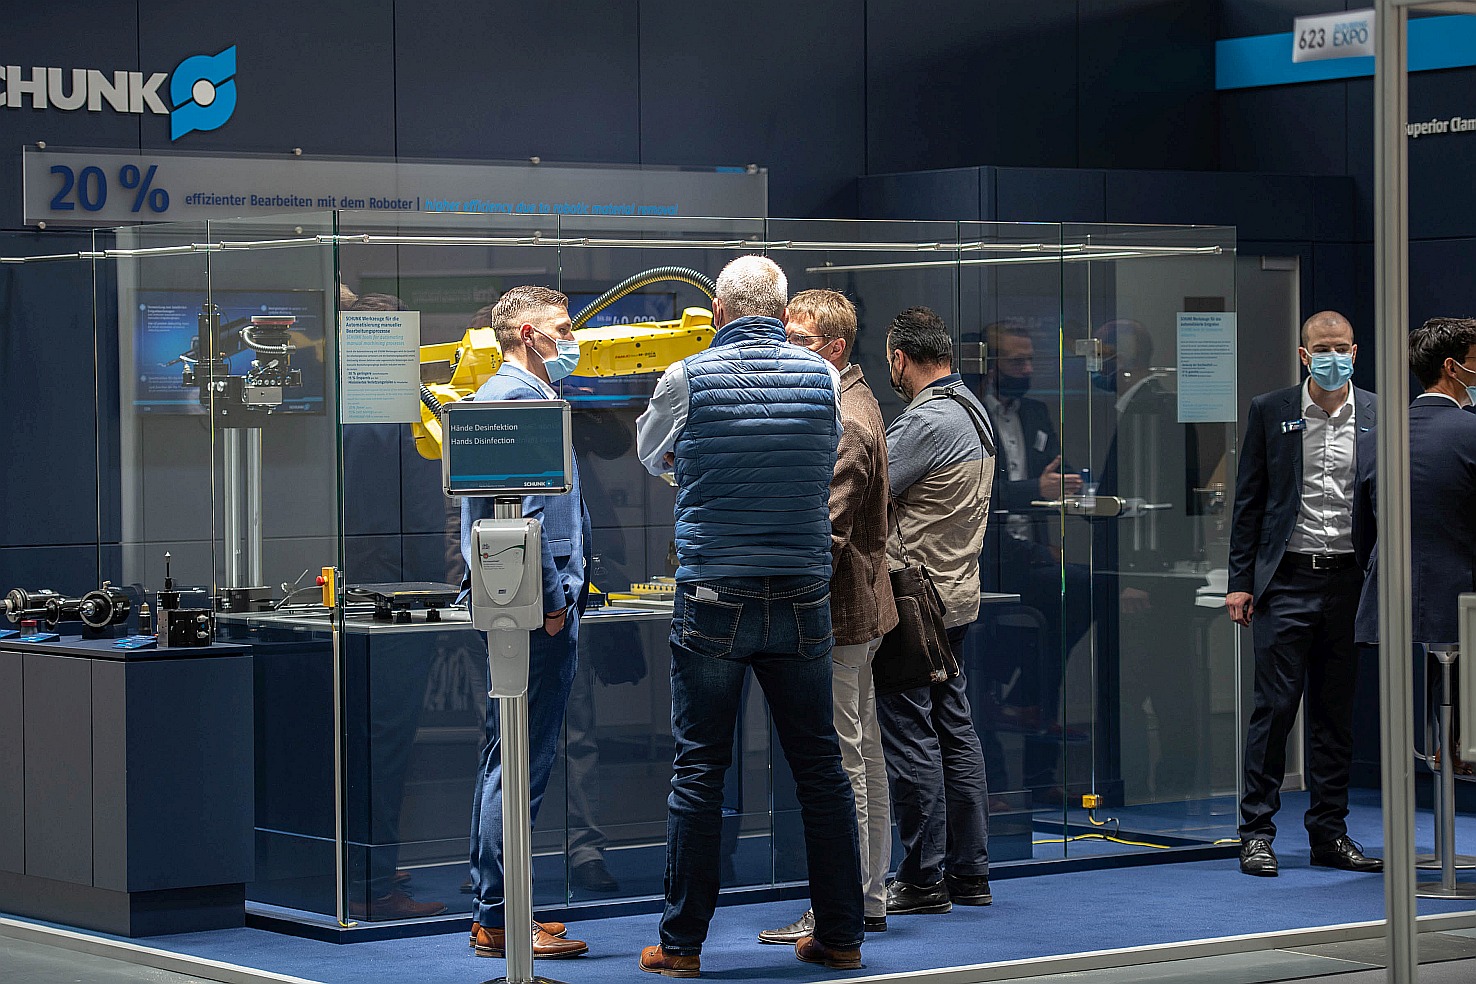 DeburringEXPO is the Europe-wide meeting place for parts manufacturers from  all industries who are seeking solutions for their requirements.  Image source: fairXperts GmbH & Co. KG